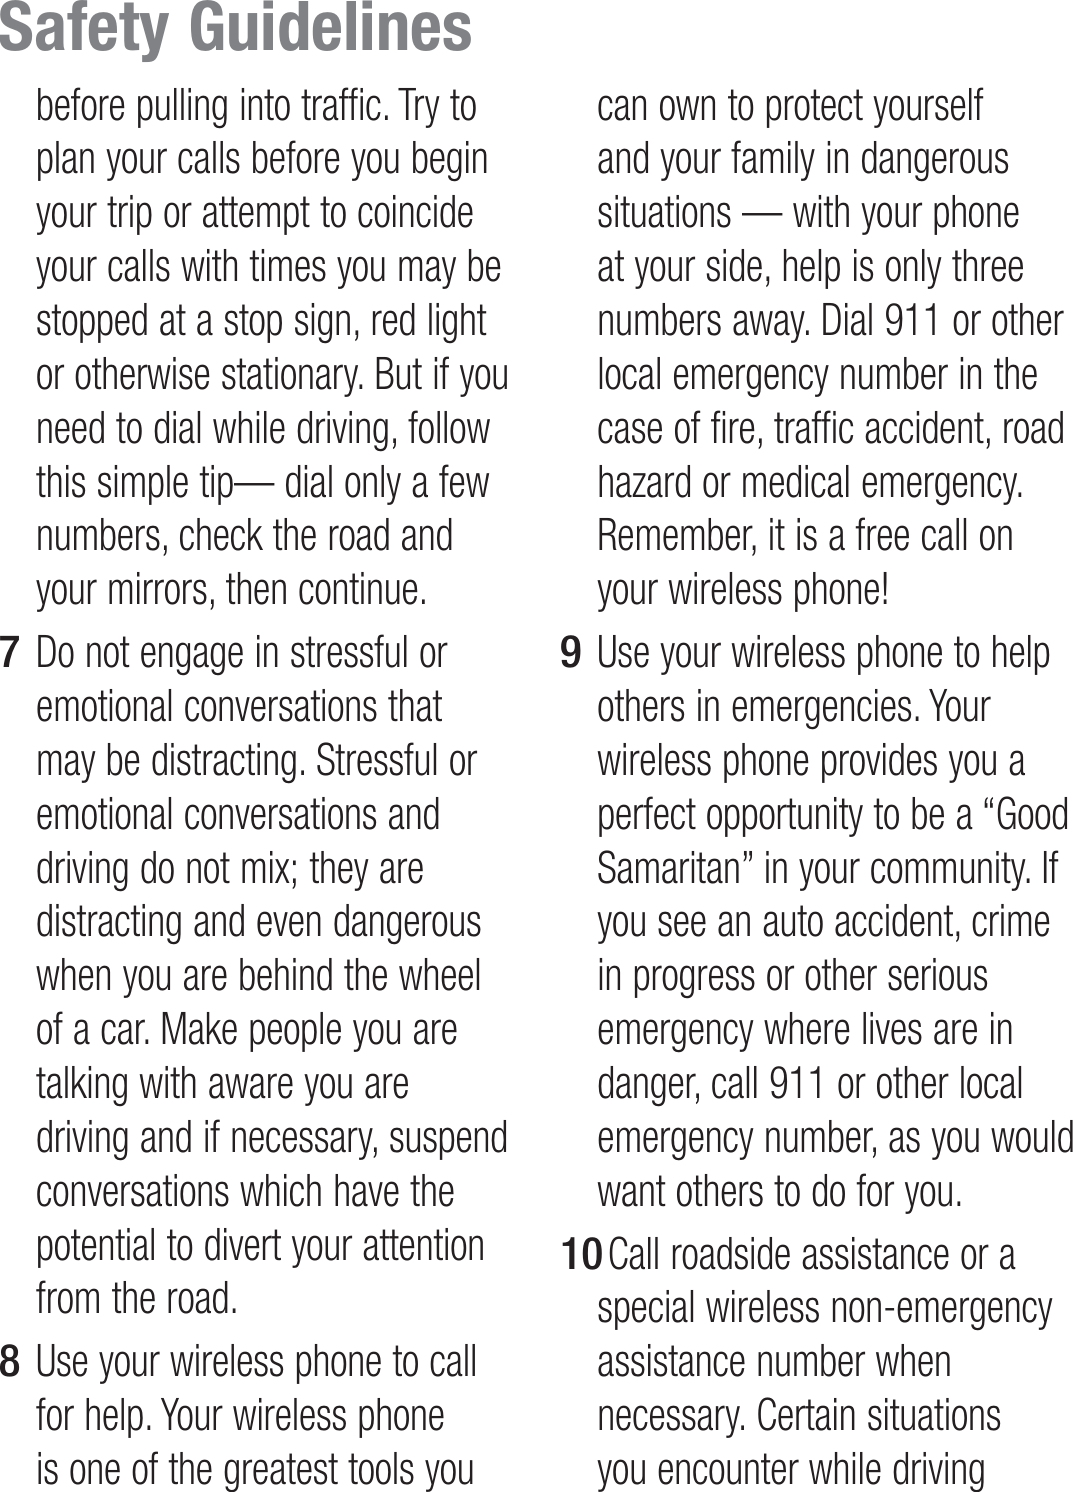 before pulling into traffic. Try to plan your calls before you begin your trip or attempt to coincide your calls with times you may be stopped at a stop sign, red light or otherwise stationary. But if you need to dial while driving, follow this simple tip— dial only a few numbers, check the road and your mirrors, then continue.Do not engage in stressful or emotional conversations that may be distracting. Stressful or emotional conversations and driving do not mix; they are distracting and even dangerous when you are behind the wheel of a car. Make people you are talking with aware you are driving and if necessary, suspend conversations which have the potential to divert your attention from the road.Use your wireless phone to call for help. Your wireless phone is one of the greatest tools you 7 8 can own to protect yourself and your family in dangerous situations — with your phone at your side, help is only three numbers away. Dial 911 or other local emergency number in the case of fire, traffic accident, road hazard or medical emergency. Remember, it is a free call on your wireless phone!Use your wireless phone to help others in emergencies. Your wireless phone provides you a perfect opportunity to be a “Good Samaritan” in your community. If you see an auto accident, crime in progress or other serious emergency where lives are in danger, call 911 or other local emergency number, as you would want others to do for you. Call roadside assistance or a special wireless non-emergency assistance number when necessary. Certain situations you encounter while driving 9 10 Safety Guidelines